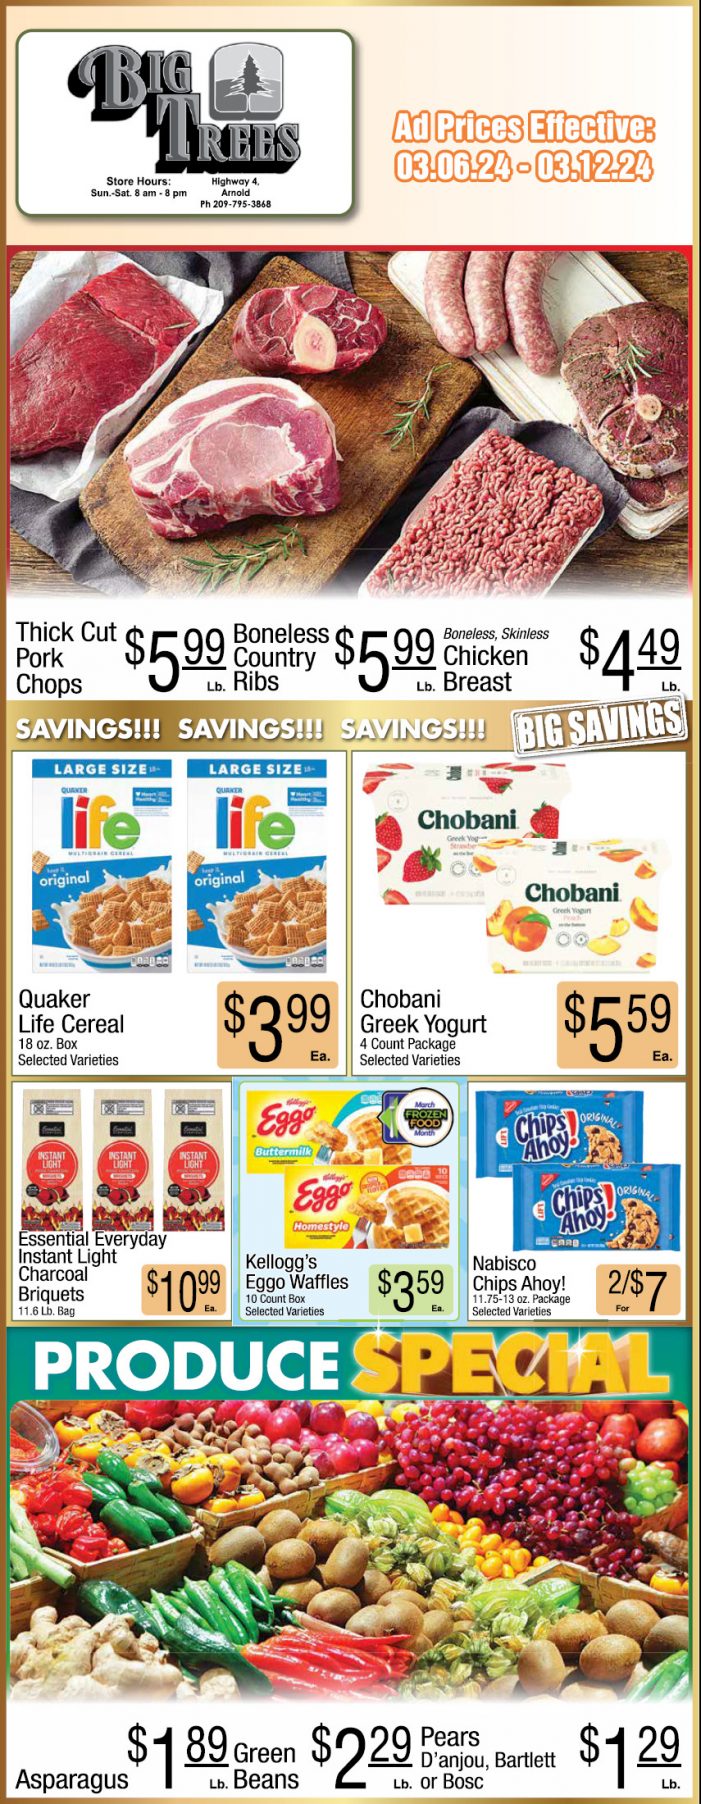 Big Trees Market Weekly Ad, Grocery, Produce, Meat & Deli Specials Through March 12th! Shop Local & Save!